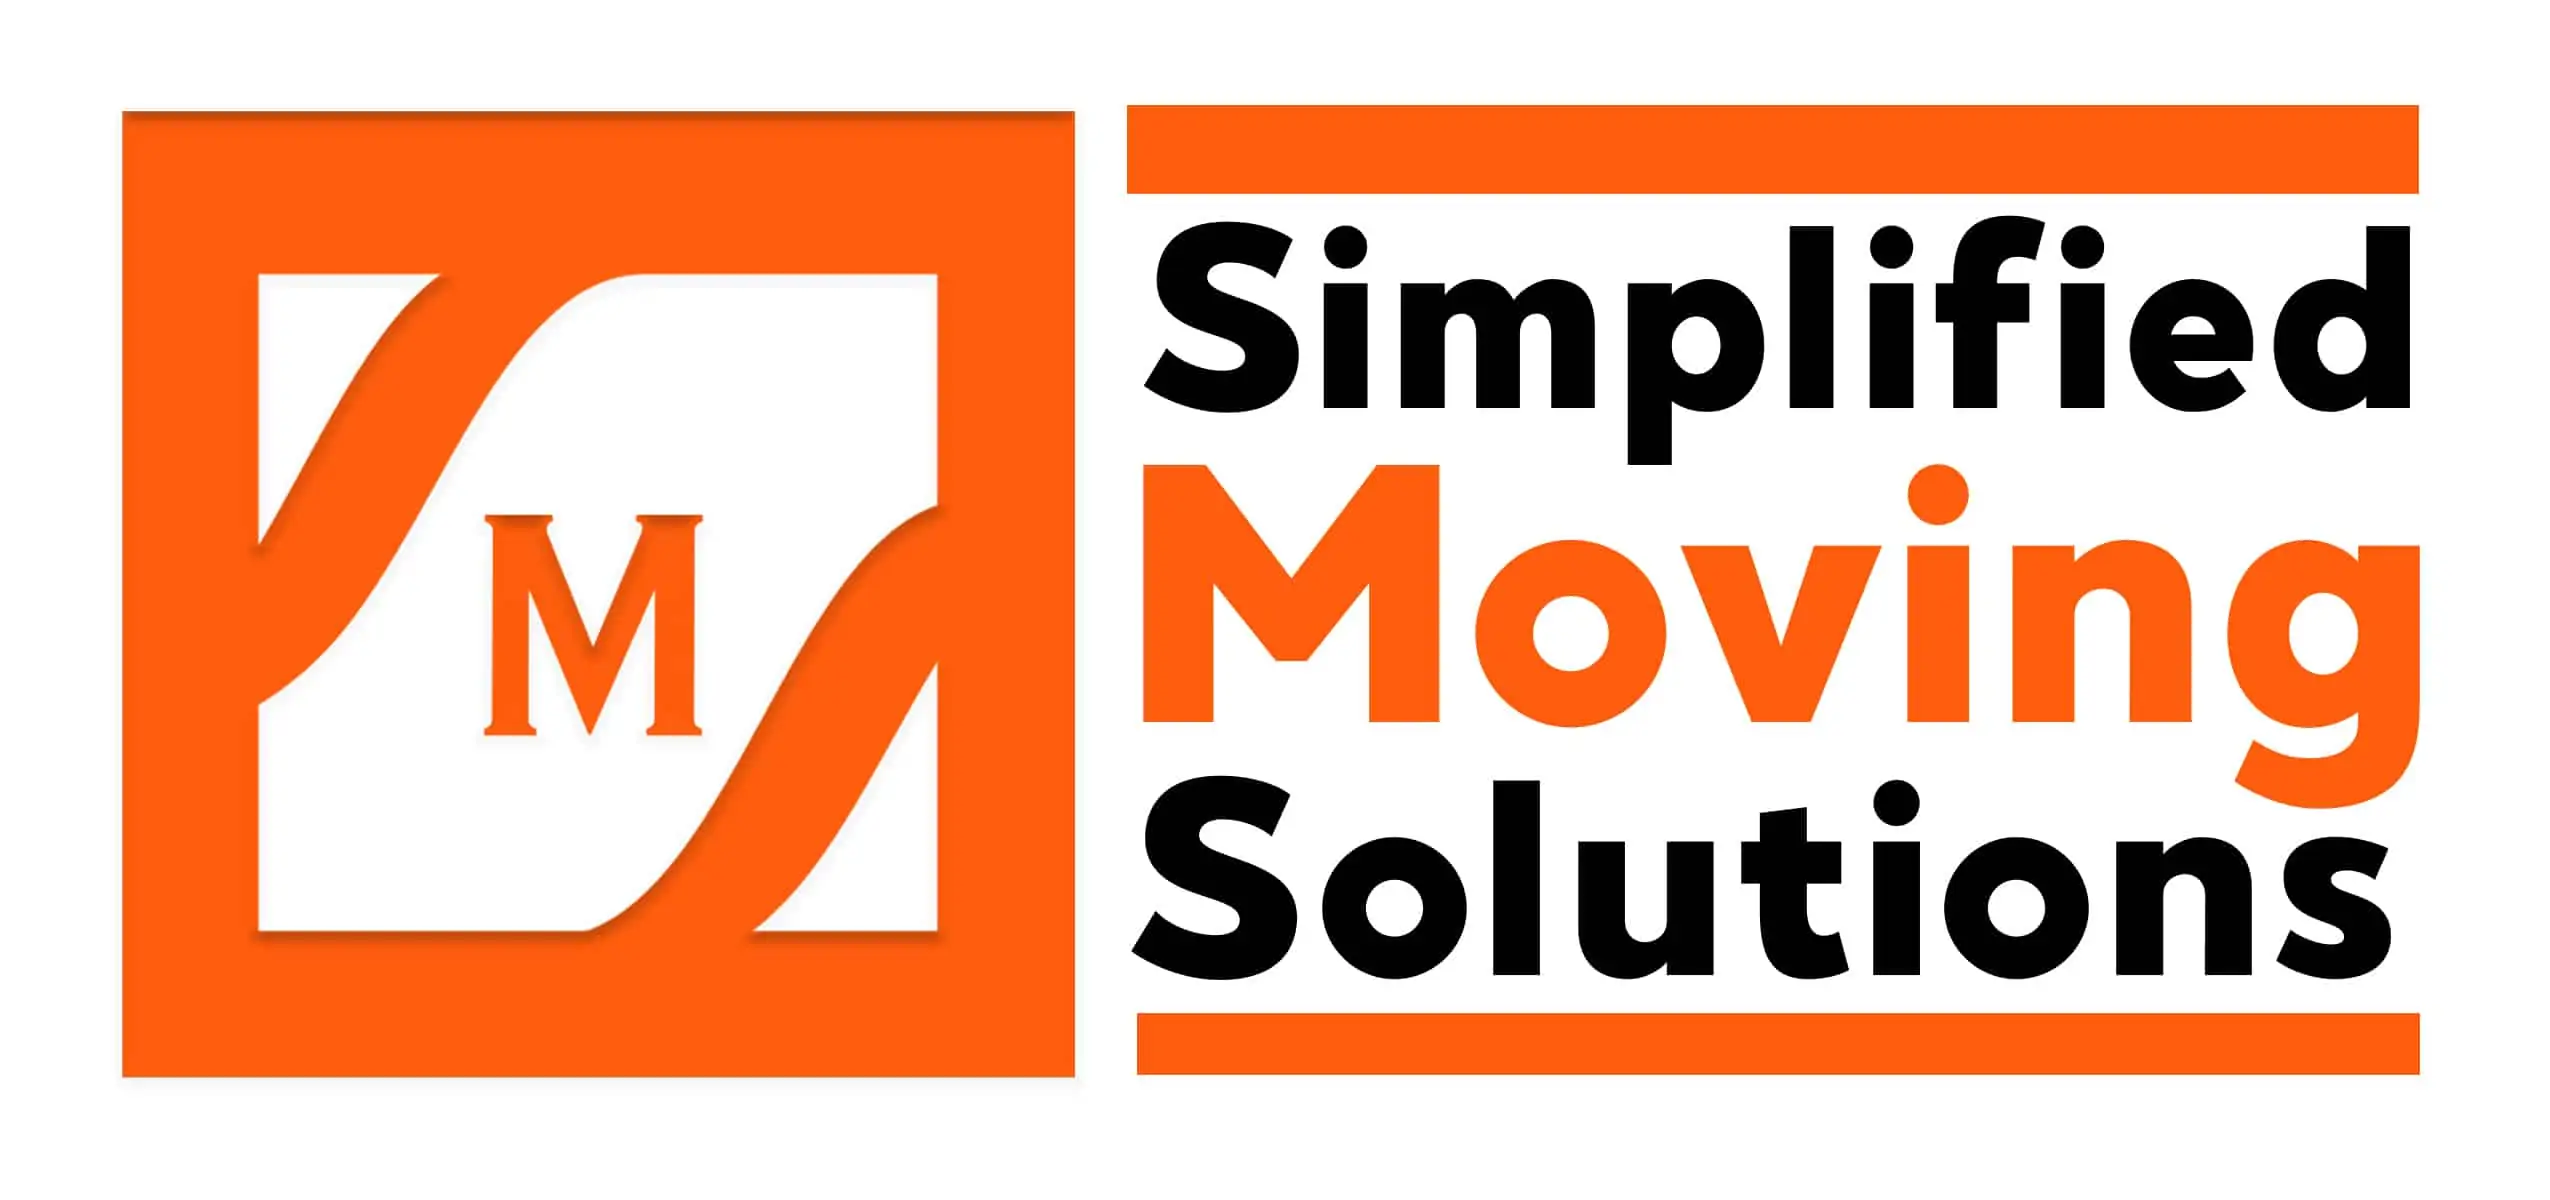 This is the Simplified Moving Solutions logo